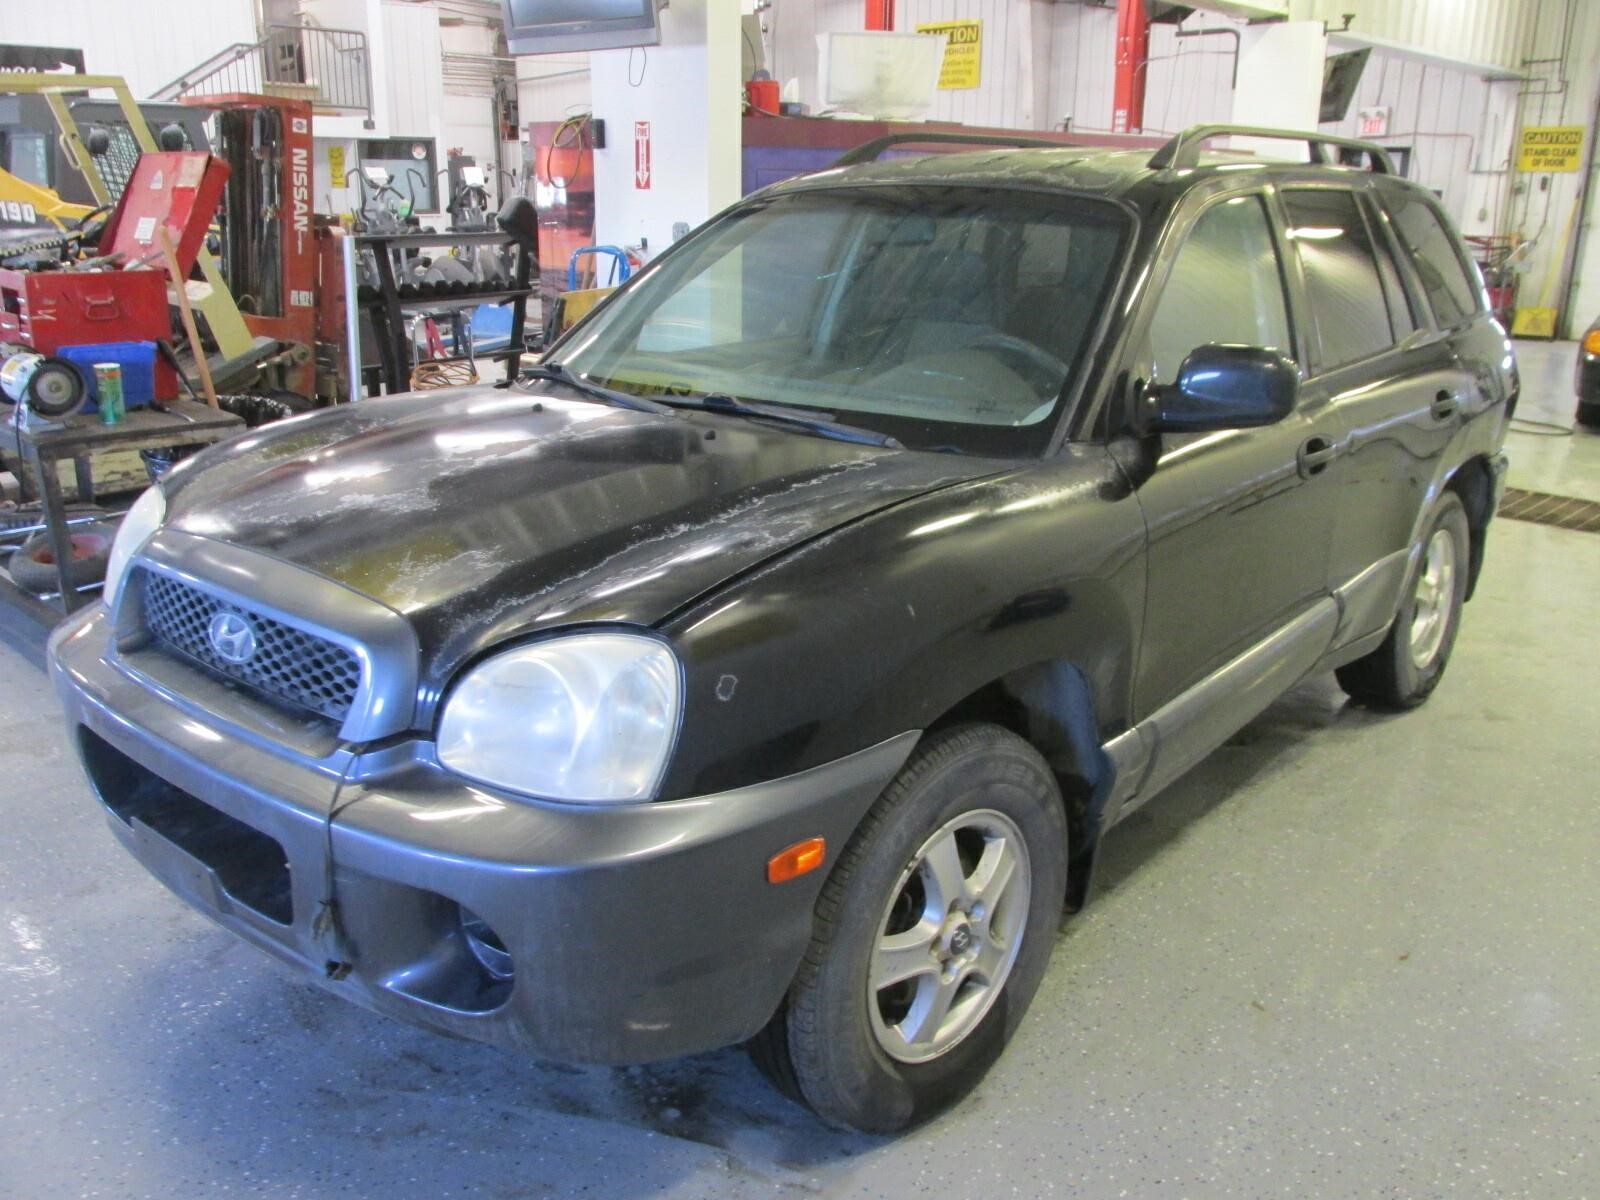 Online Auto Auction January 25 2021 Featuring MTS/Bell Can.